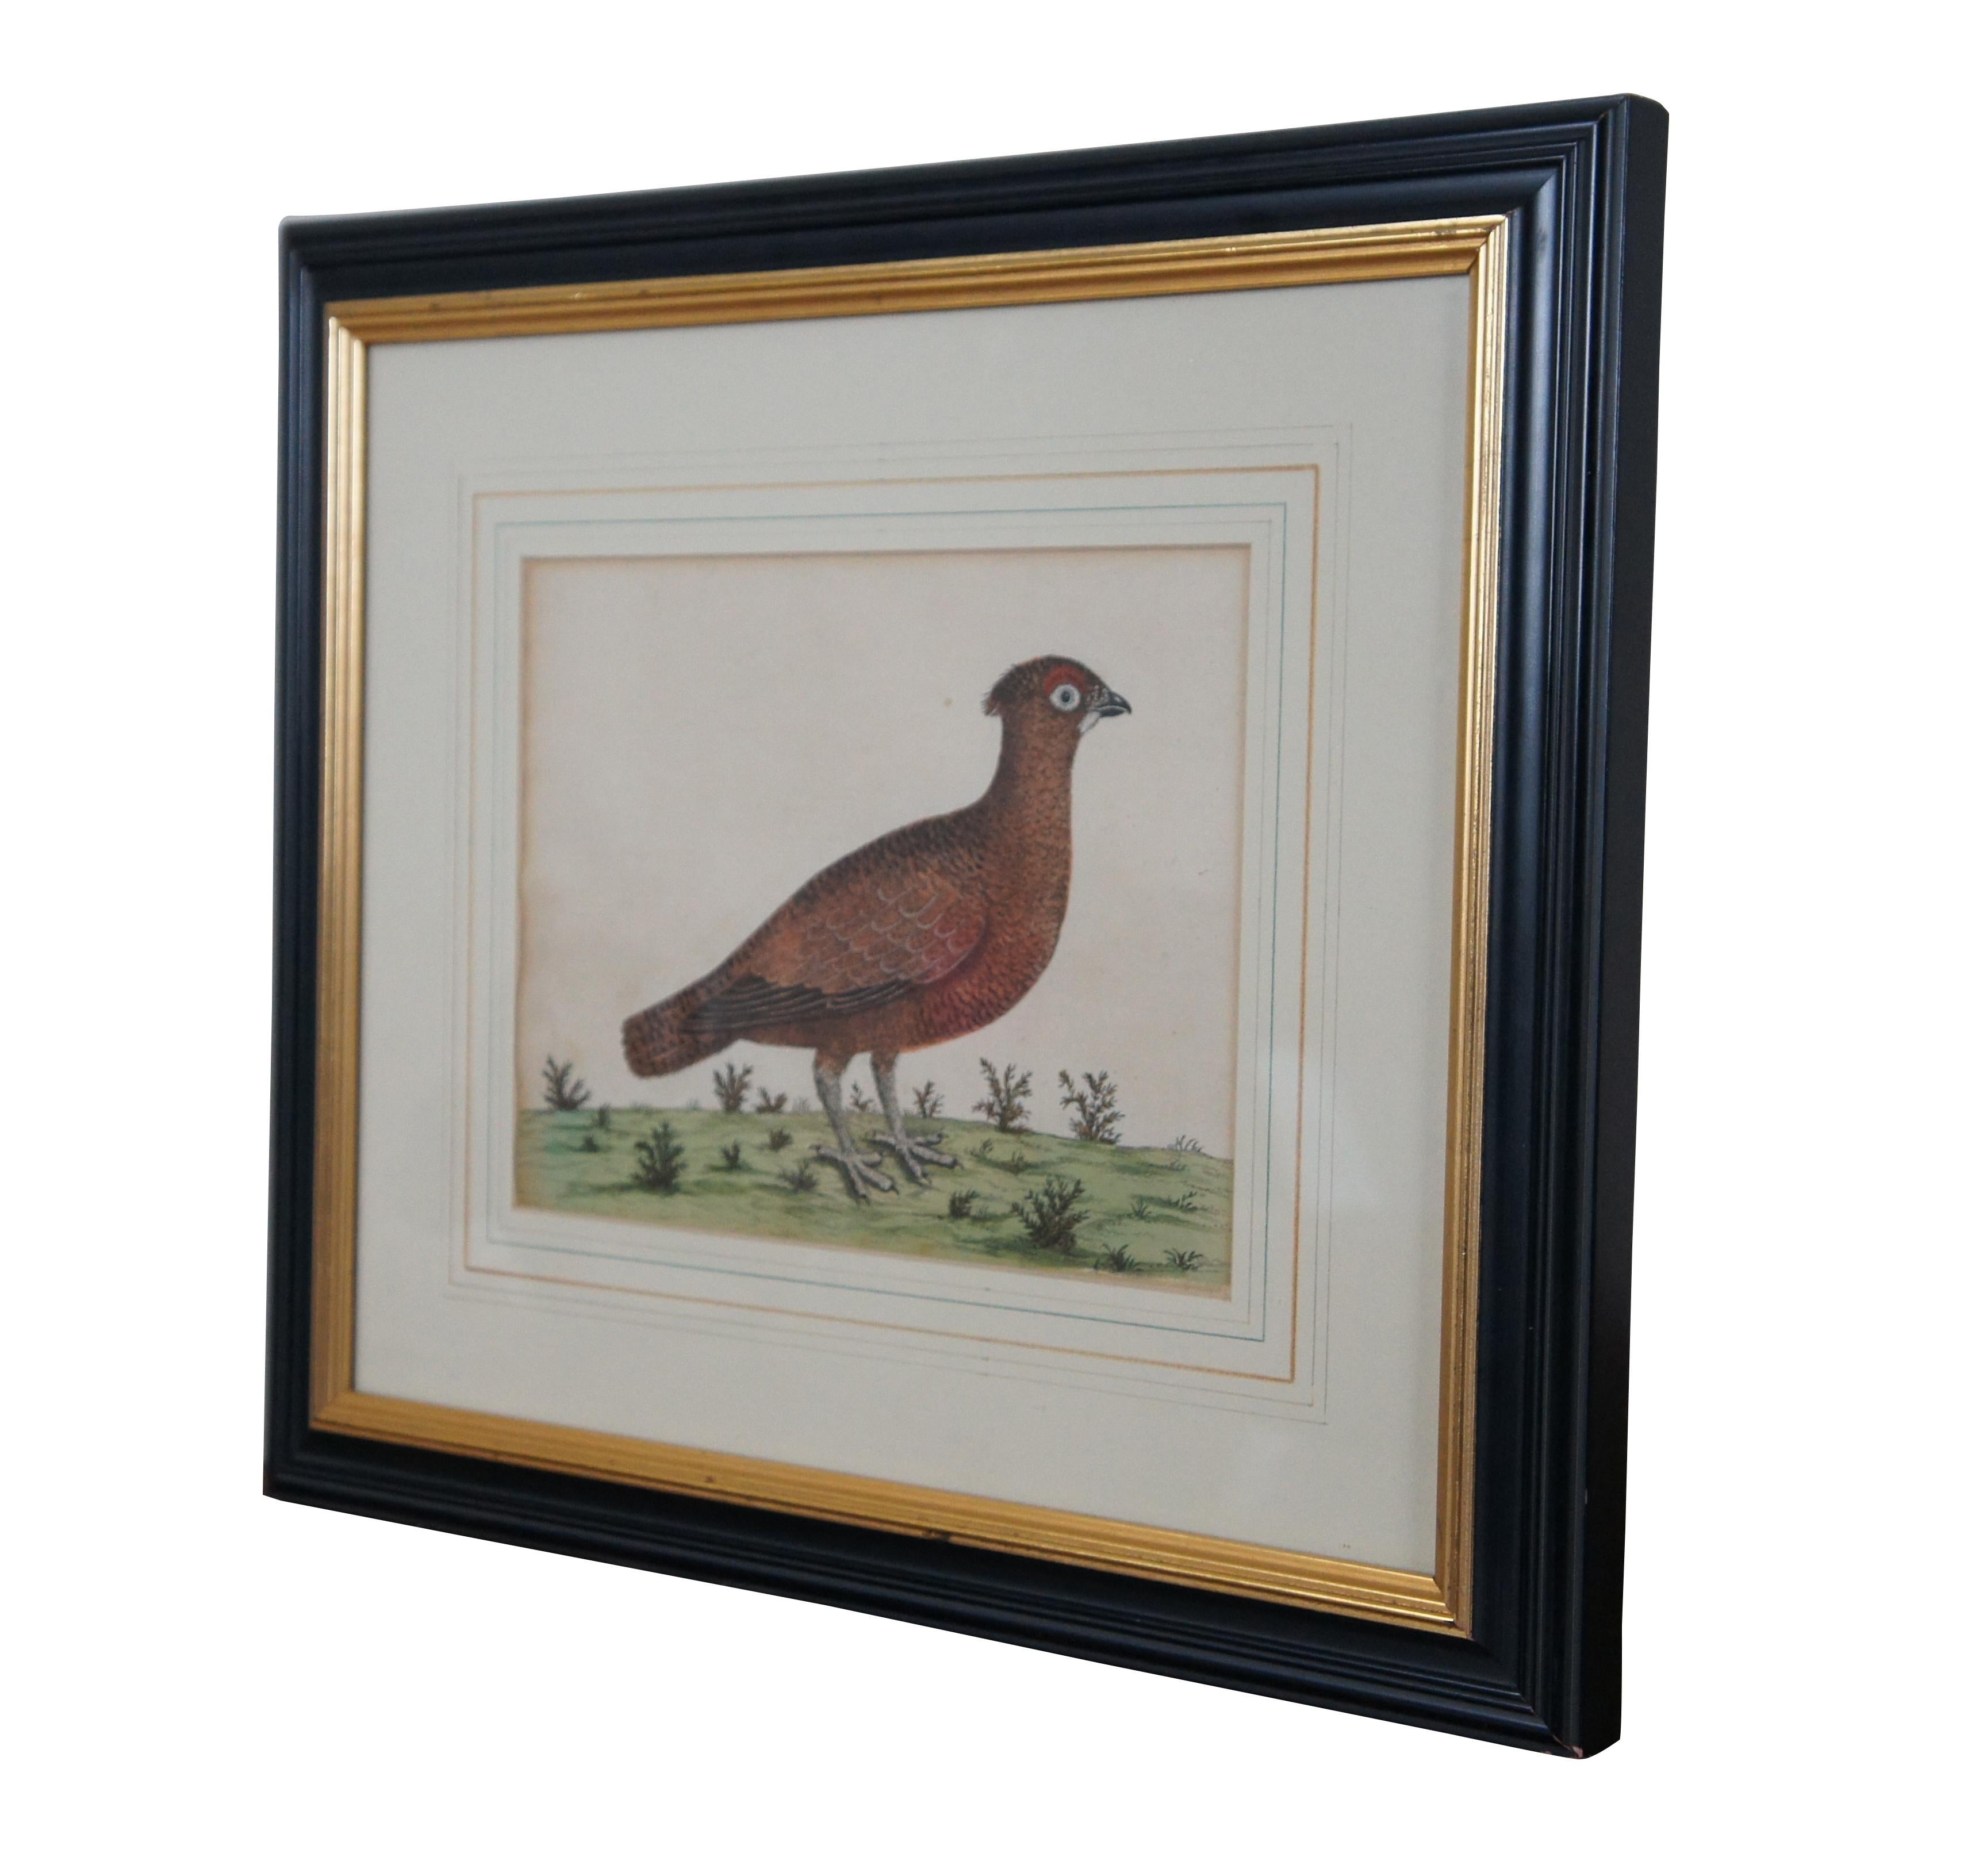 Antique 19th century framed, hand colored, copperplate engraving of a red grouse bird by Eleazar Albin. Red plumage over the eye suggests this is a grouse, though it also looks close to a partridge, quail, or ptarmigan.

“Eleazar Albin (fl. 1690 –